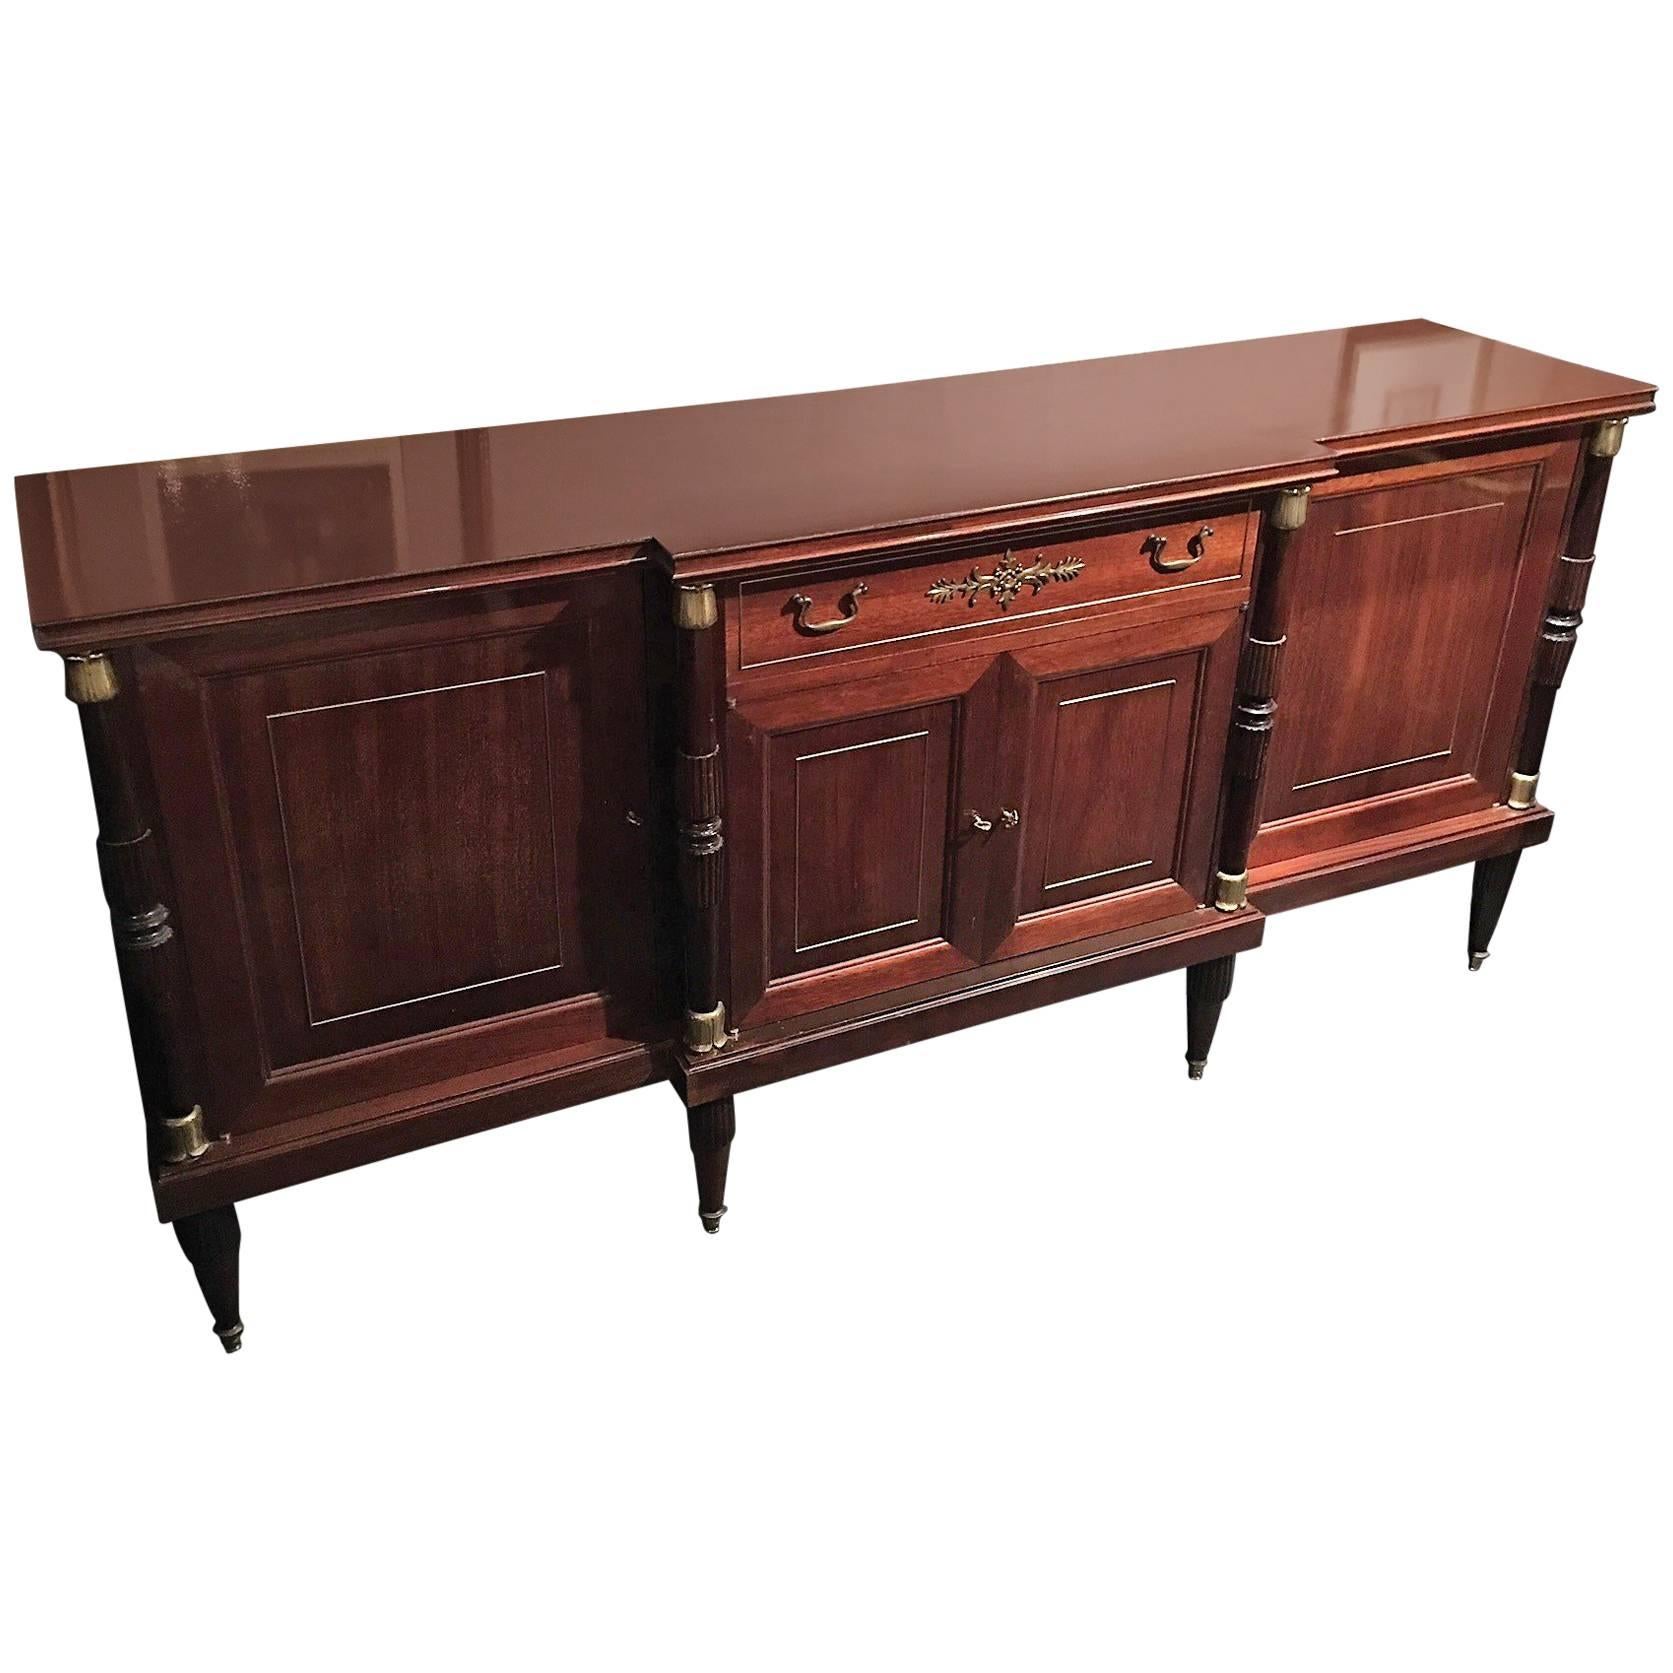 French Directoire Style Mahogany Credenza or Sideboard, 19th Century